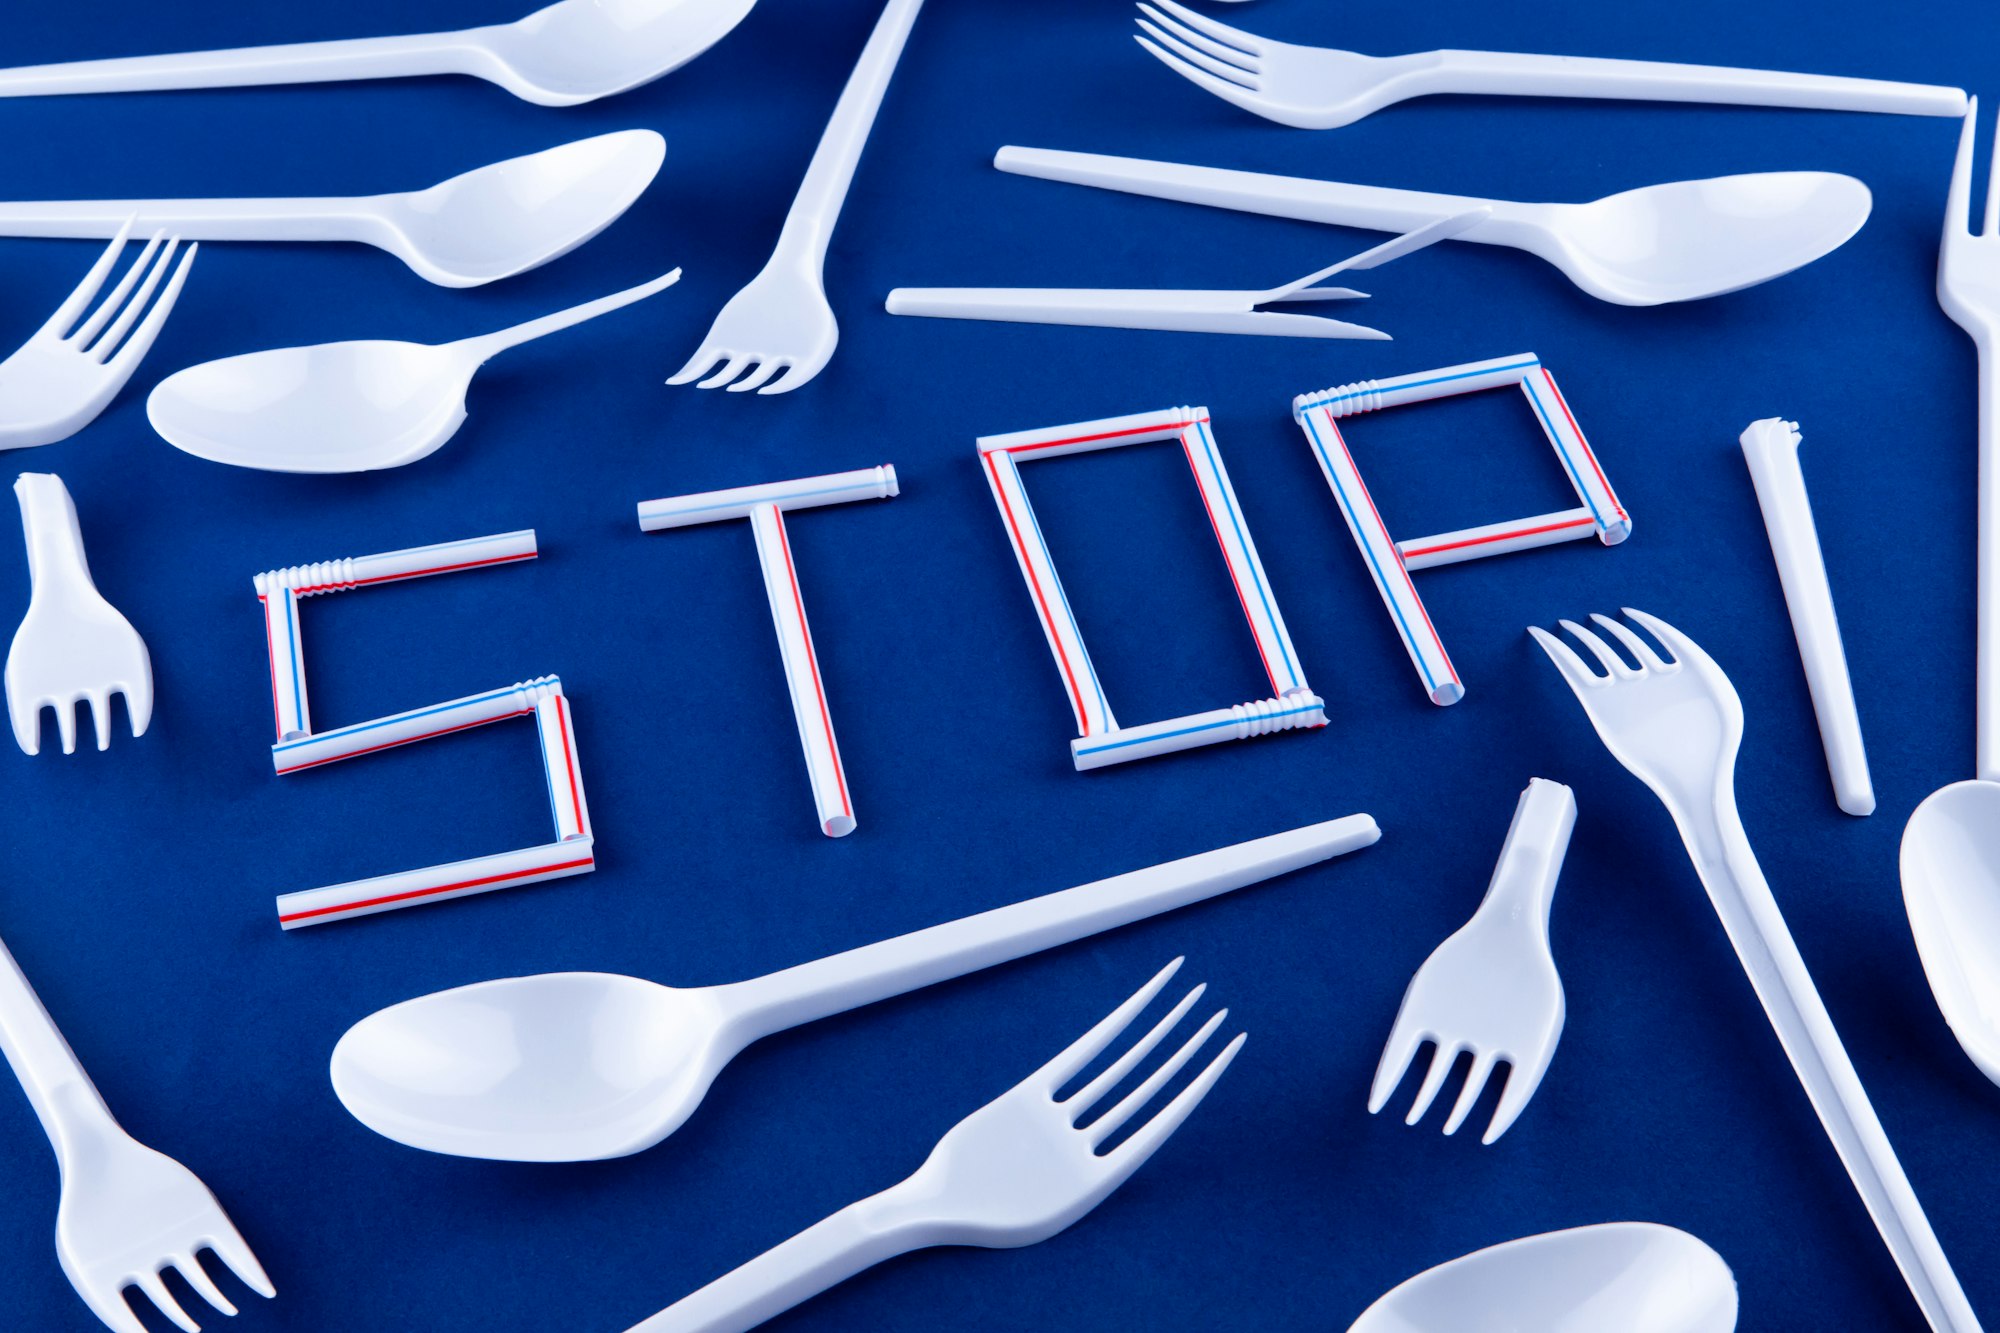 plastic forks and spoons and straws spelling "stop"